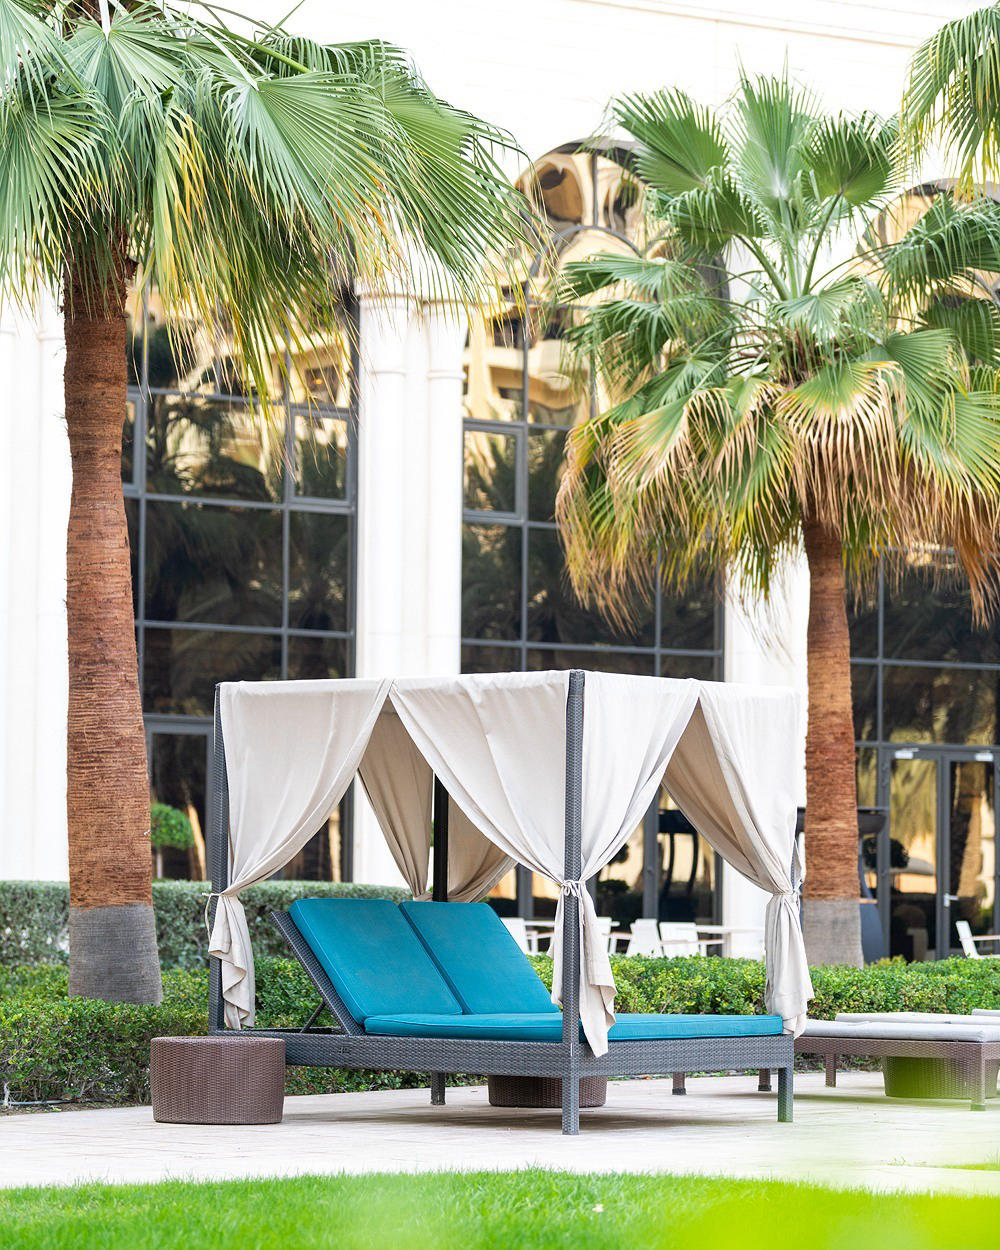 image  1 The Ritz-Carlton Abu Dhabi, Grand Canal - Unwind and relax in your private cabana